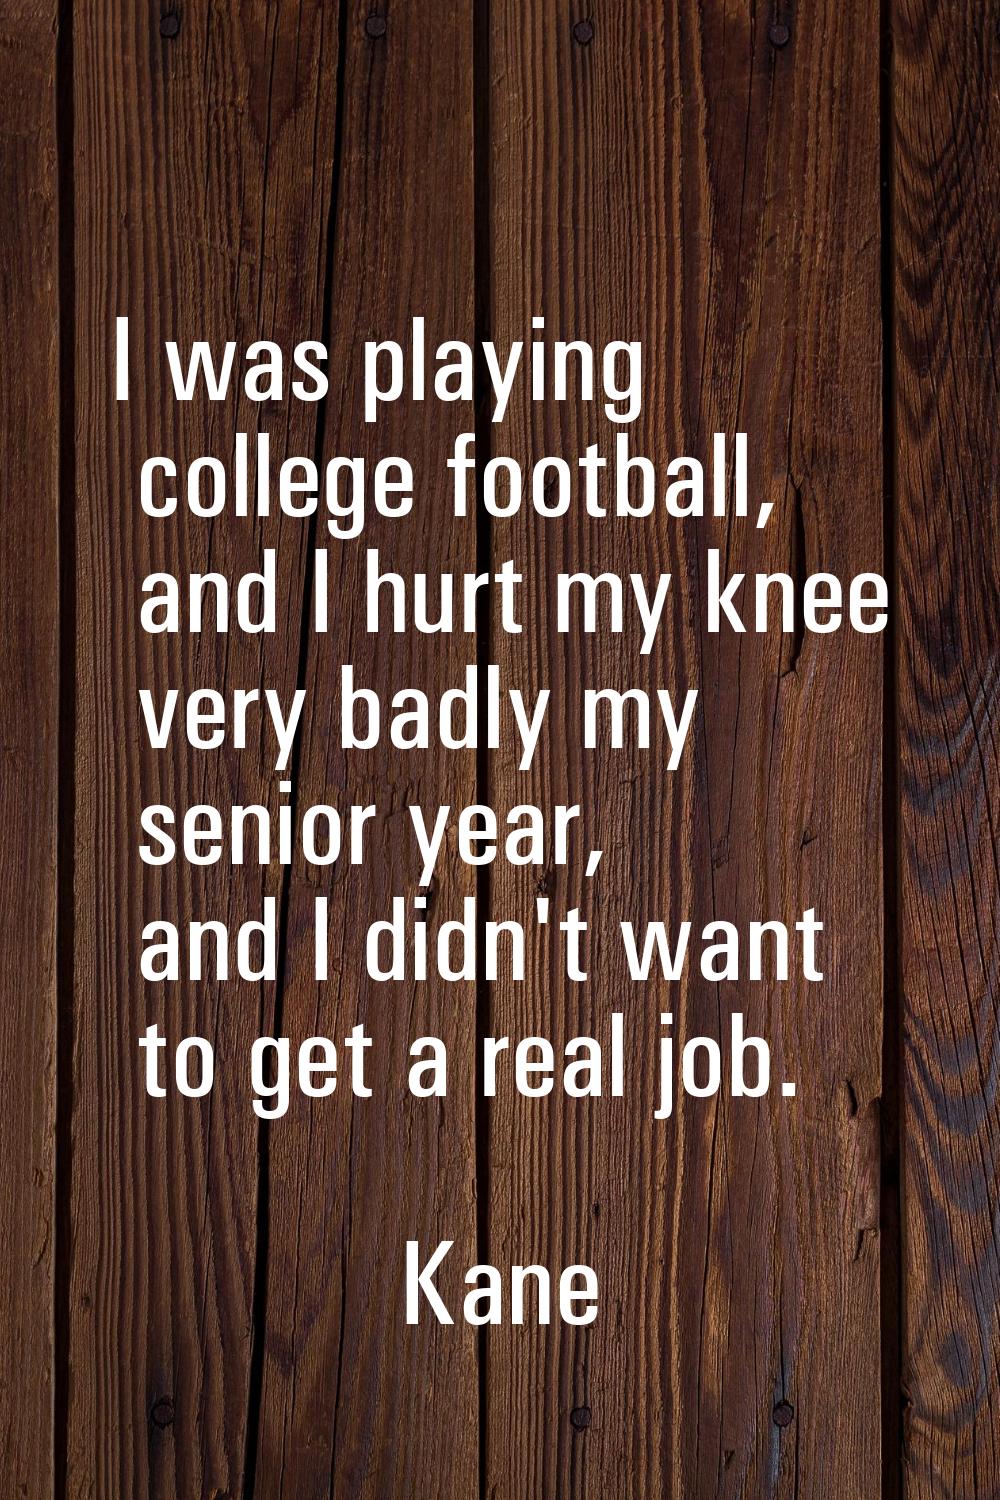 I was playing college football, and I hurt my knee very badly my senior year, and I didn't want to 